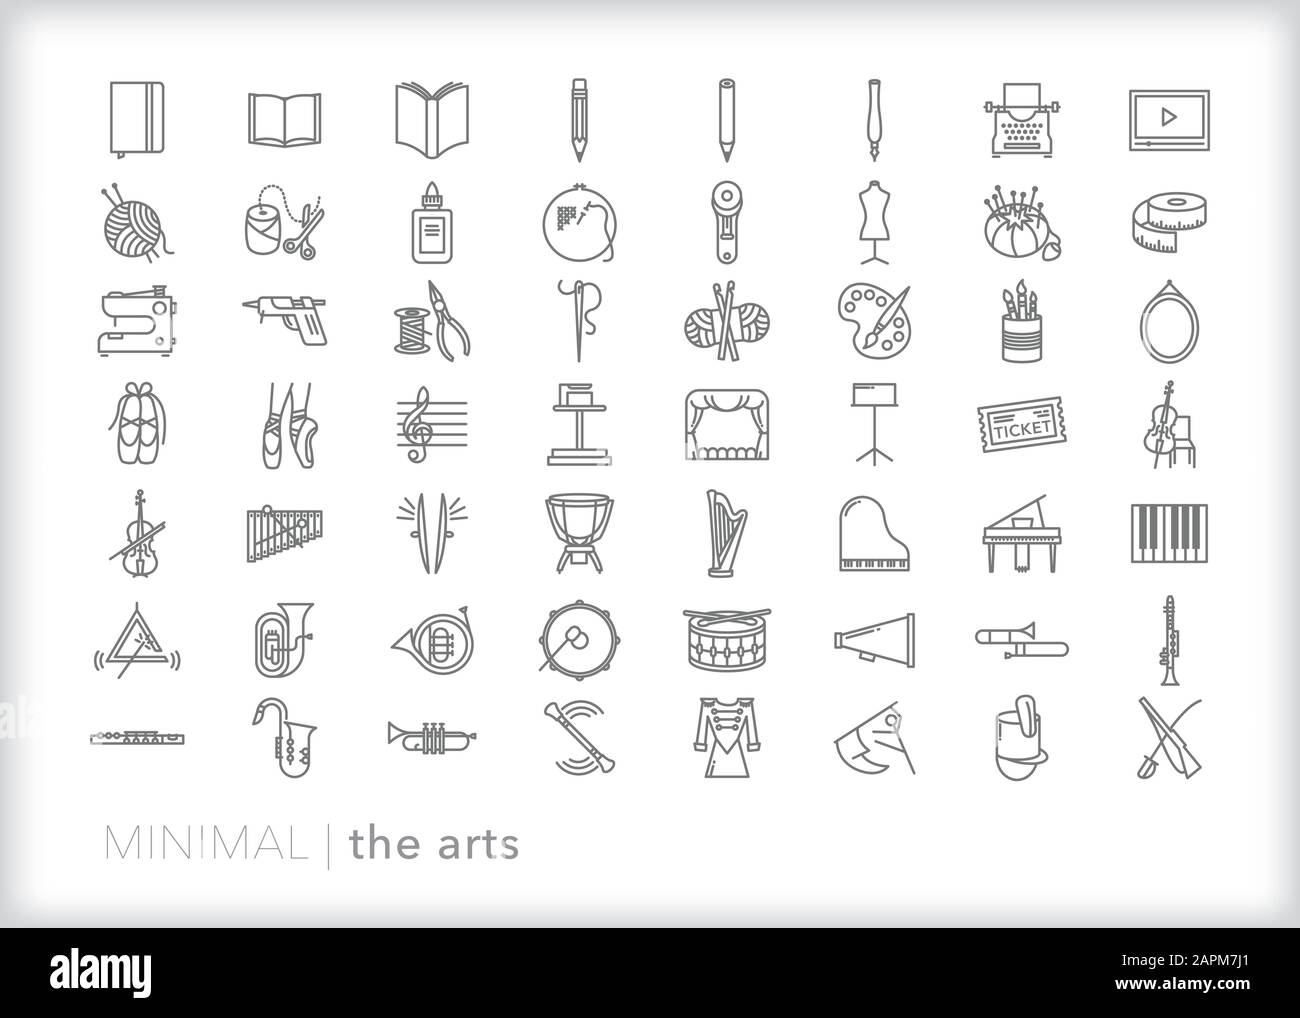 Set of more than 50 education arts line icons of music, writing, literature, drawing, painting, craft, dance, orchestra, jazz, symphony Stock Vector